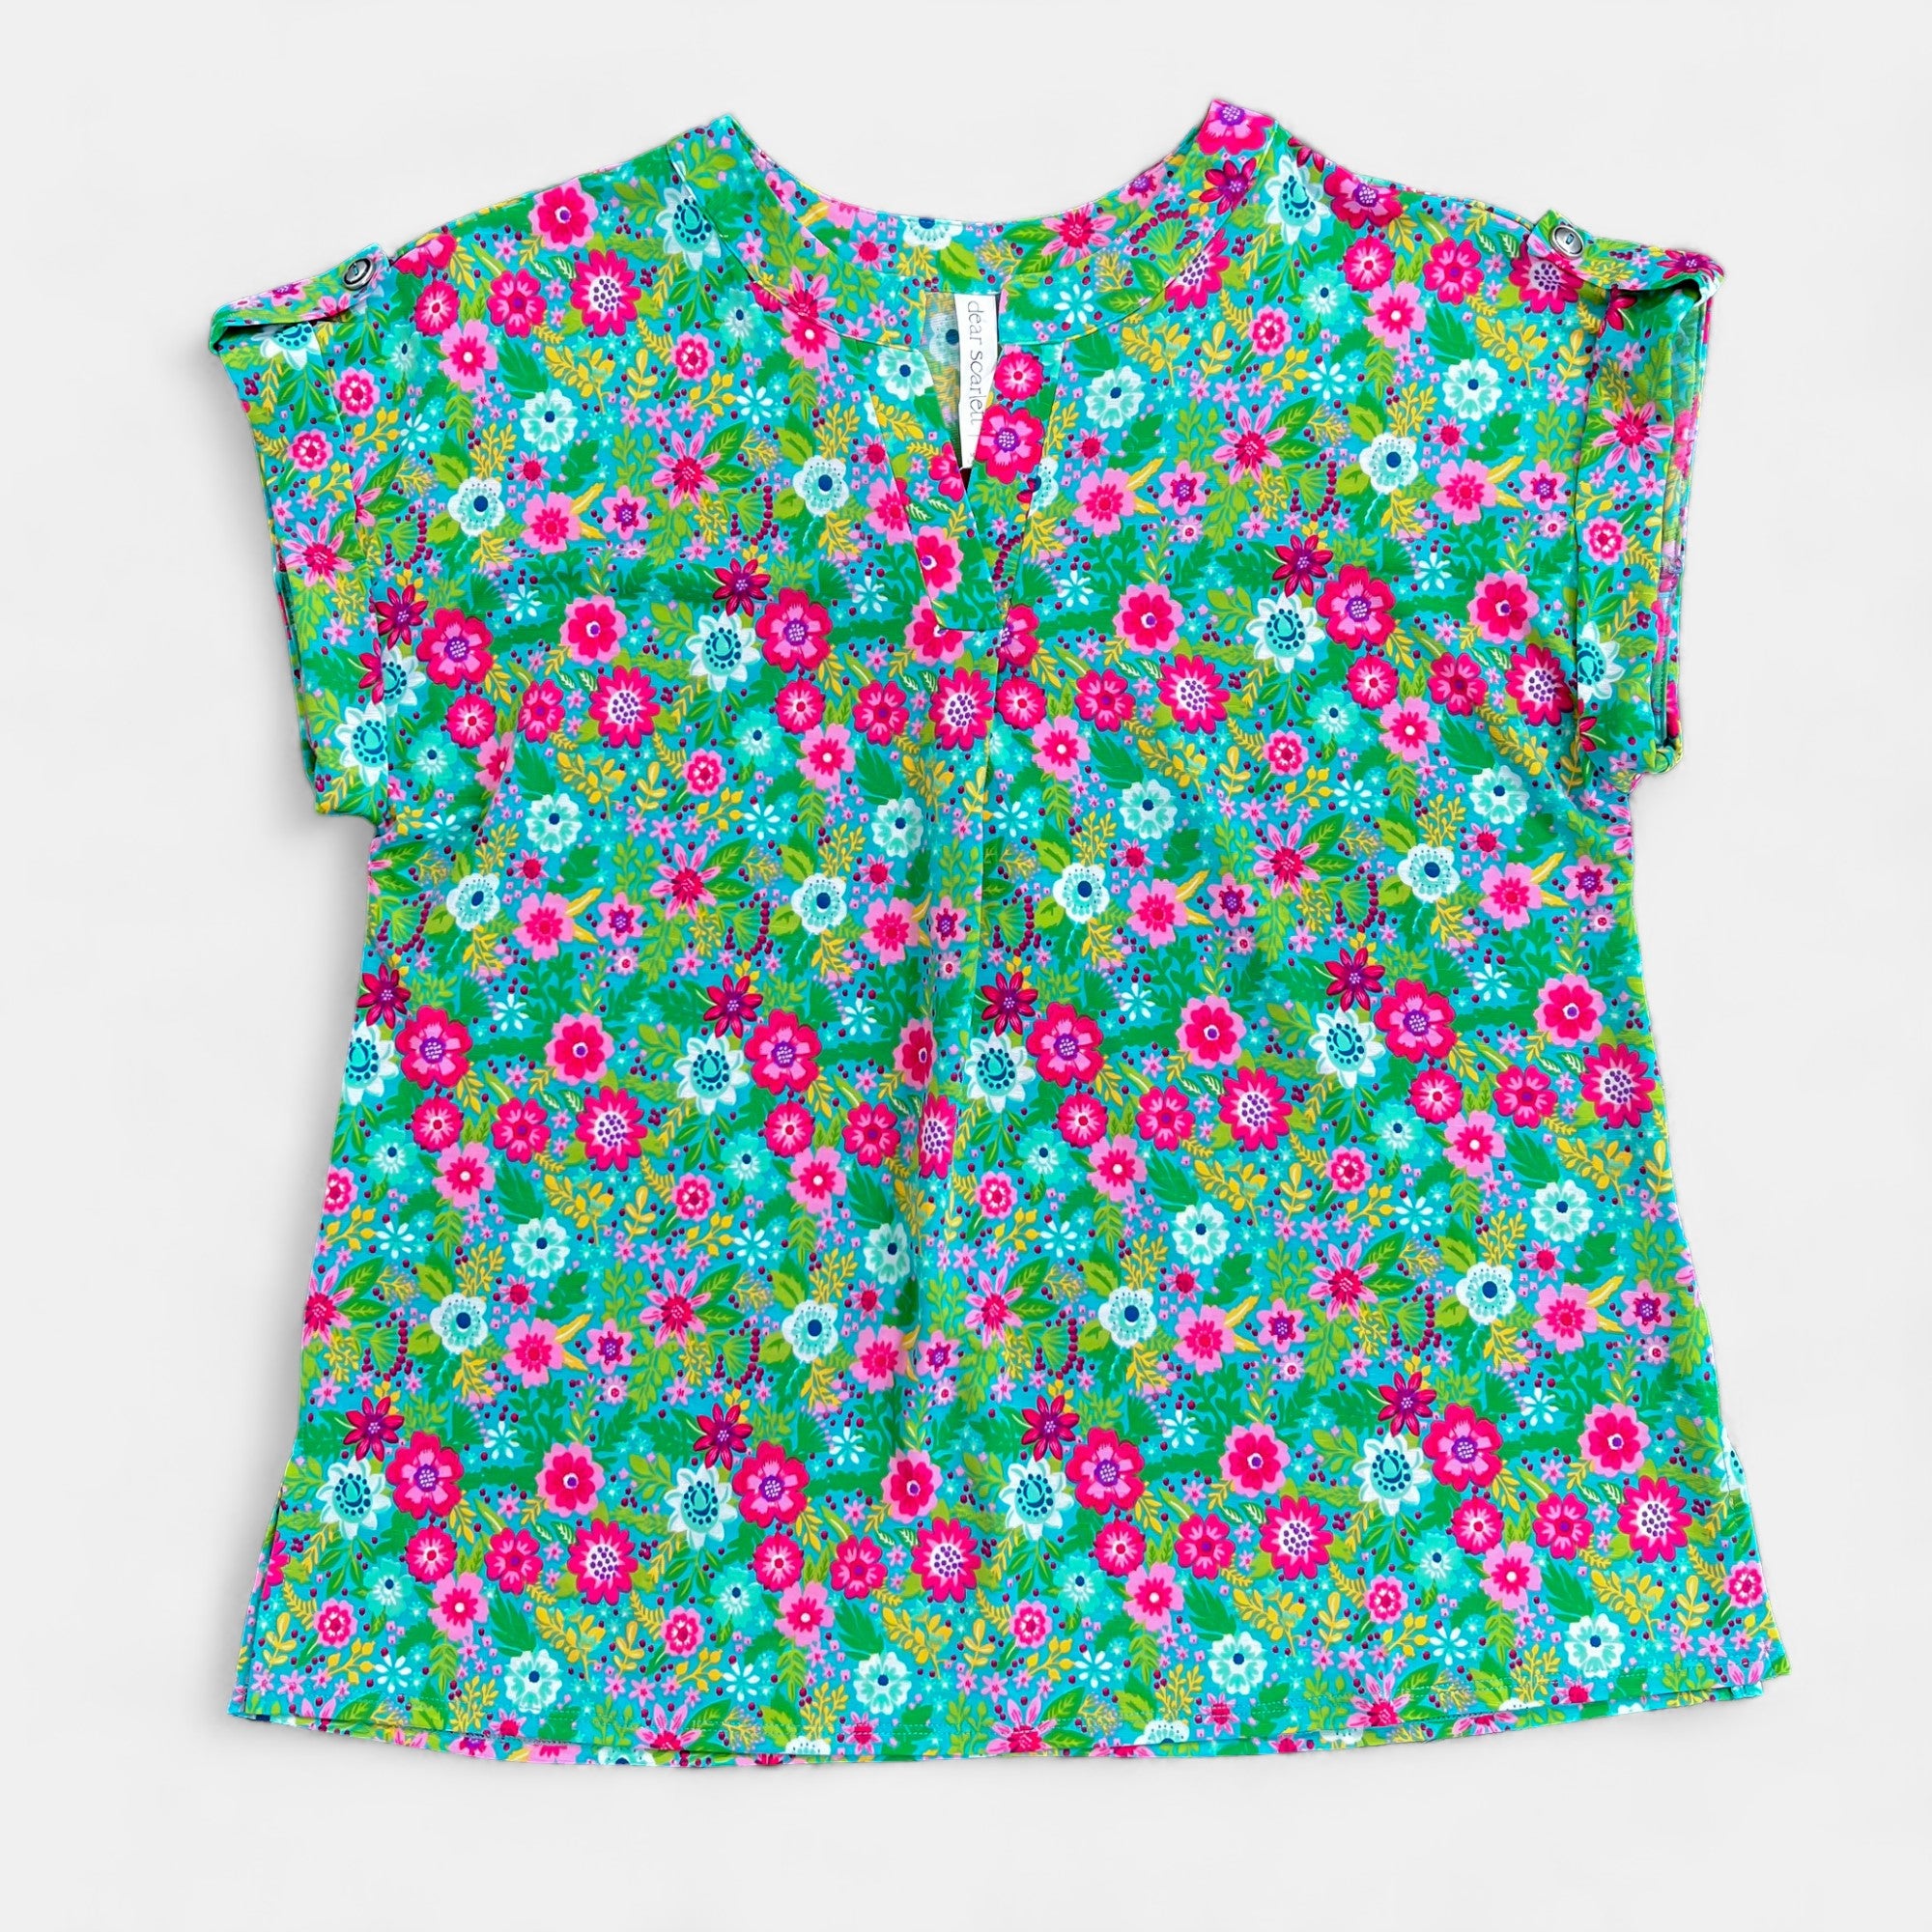 Emerald Blooming Lizzy Short Sleeve Top